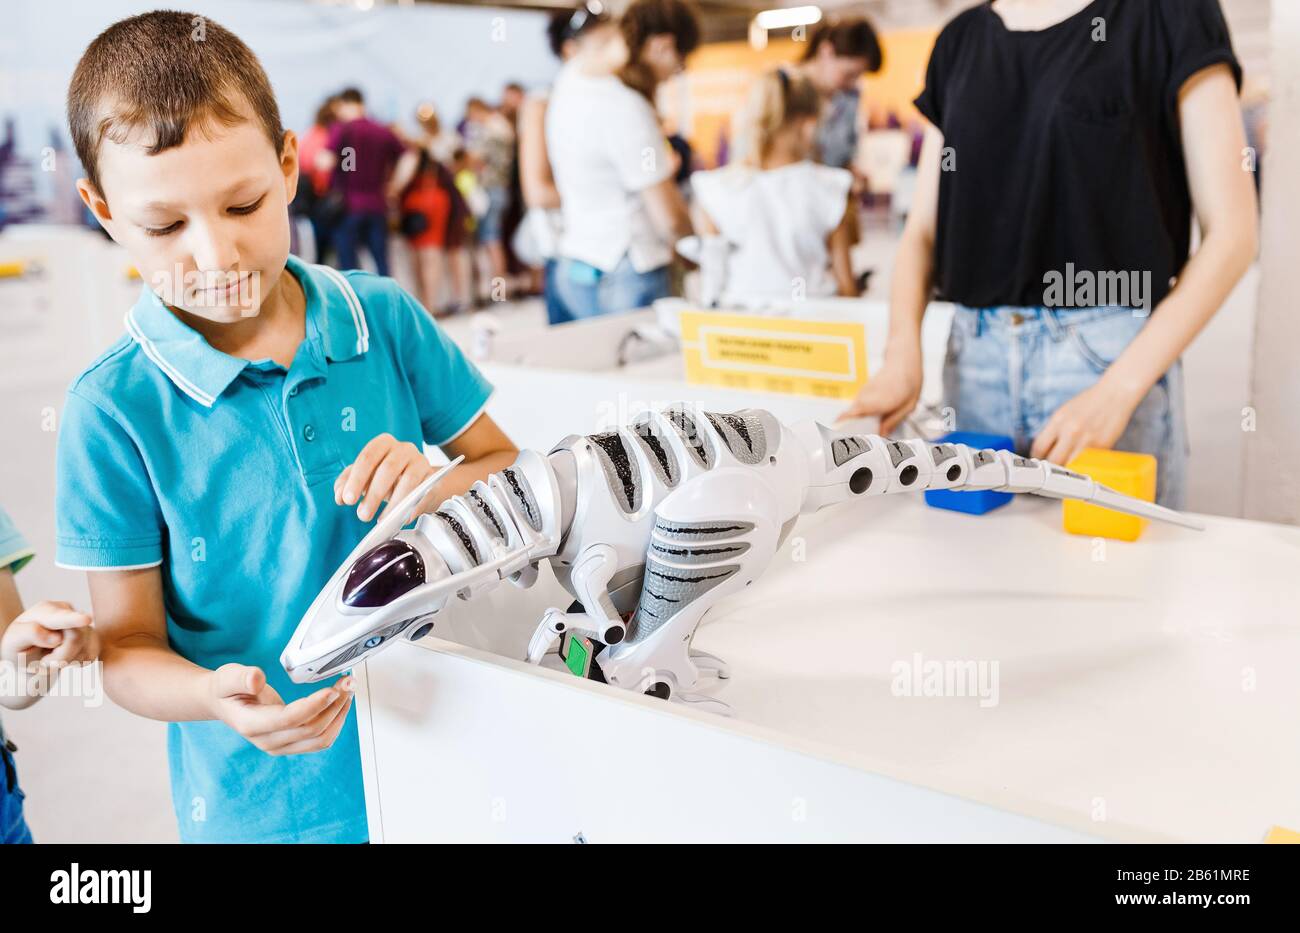 Kid boy playing with interactive robot toy at the exhibition Stock Photo